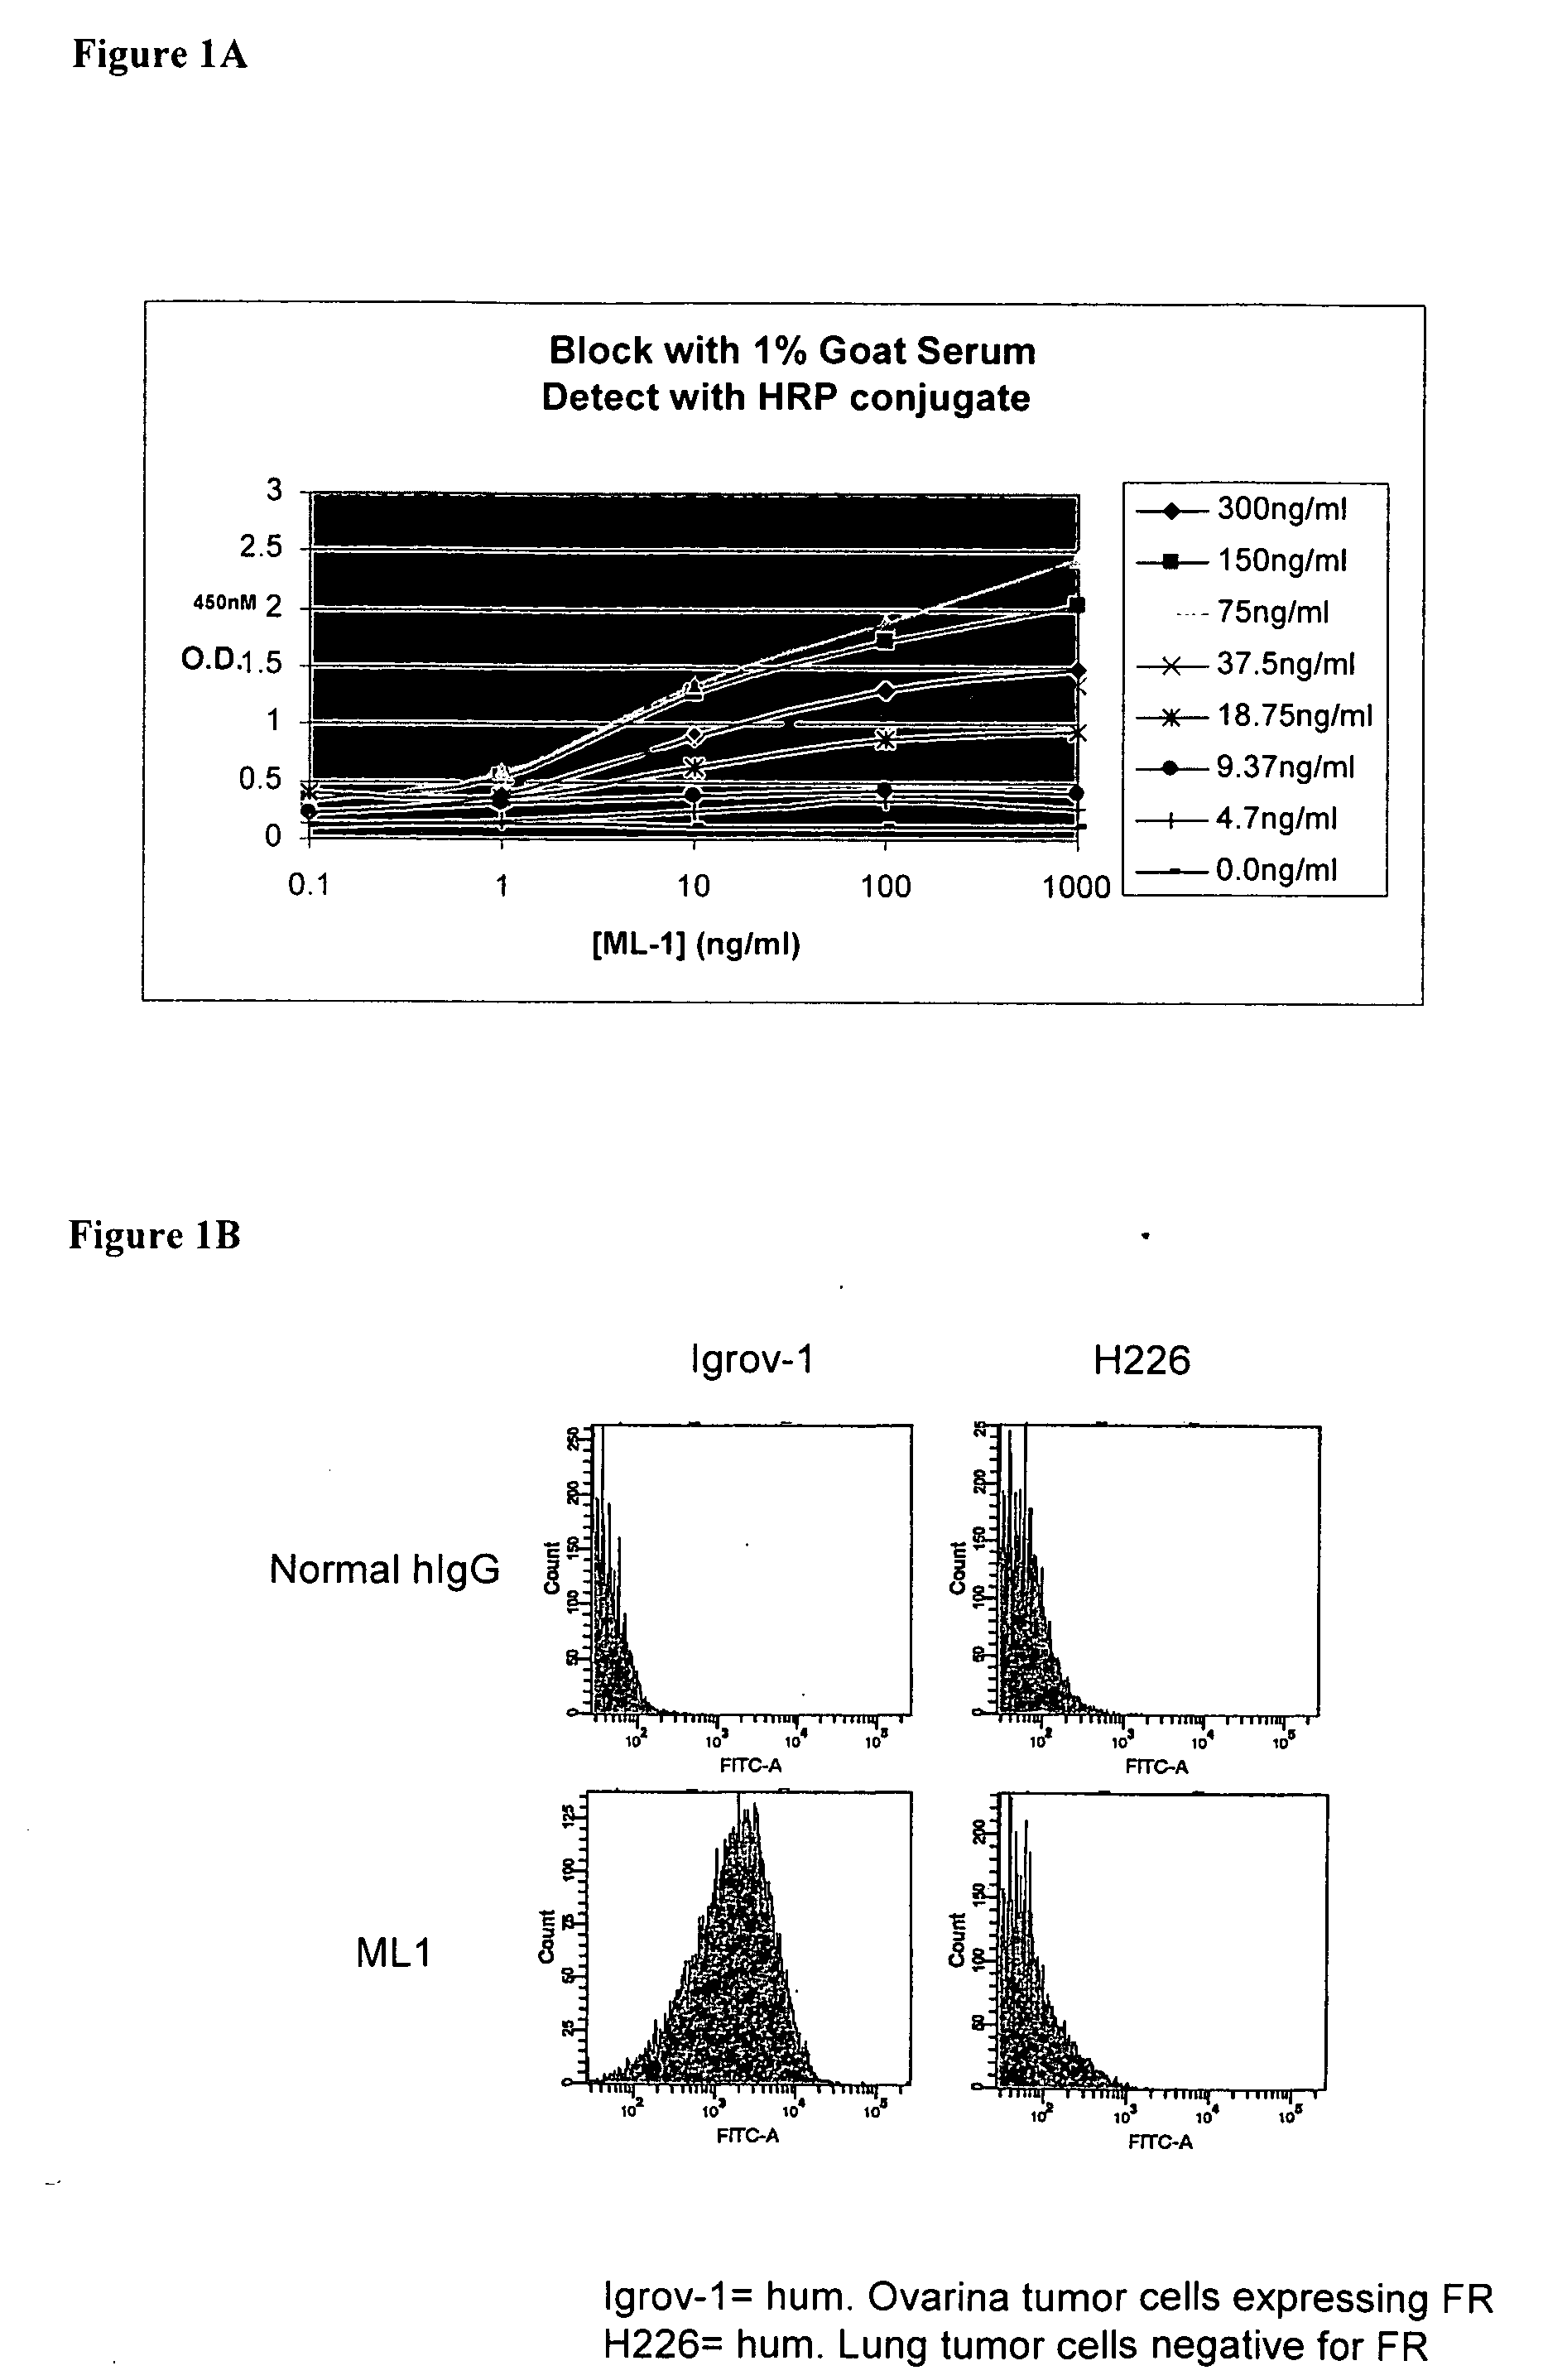 Antibodies with immune effector activity and that internalize in folate receptor alpha-positive cells